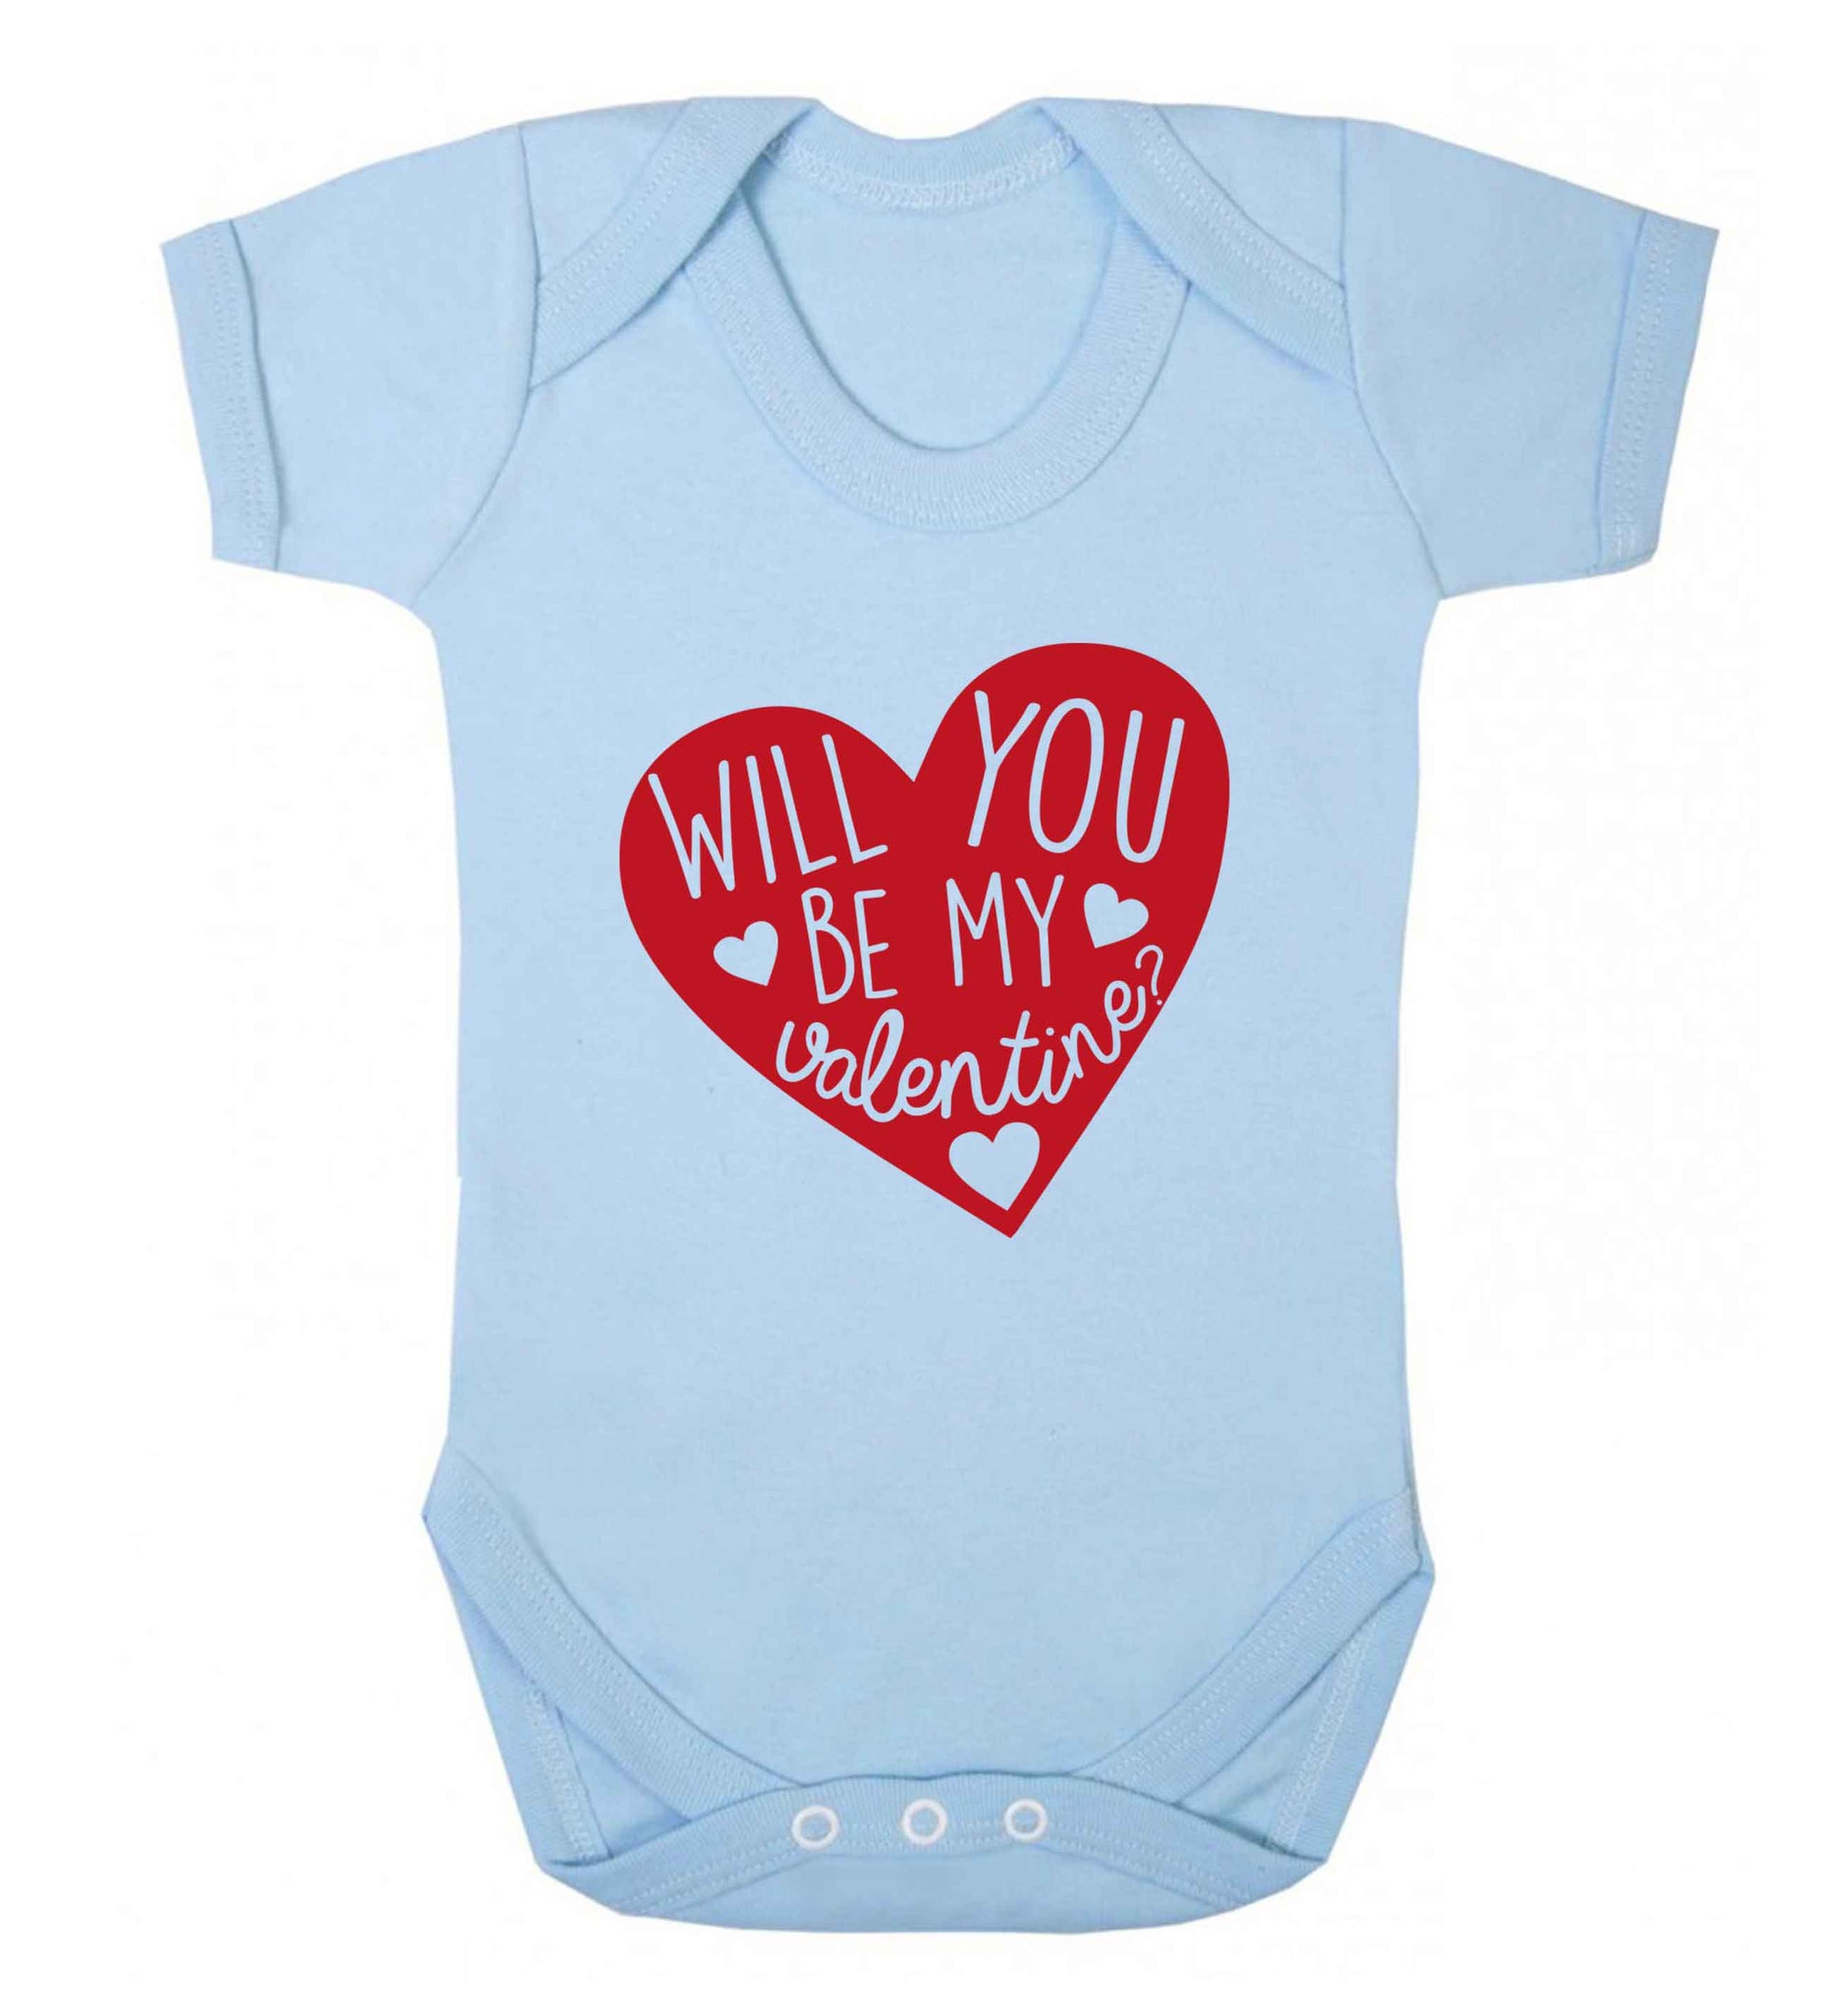 Will you be my valentine? baby vest pale blue 18-24 months